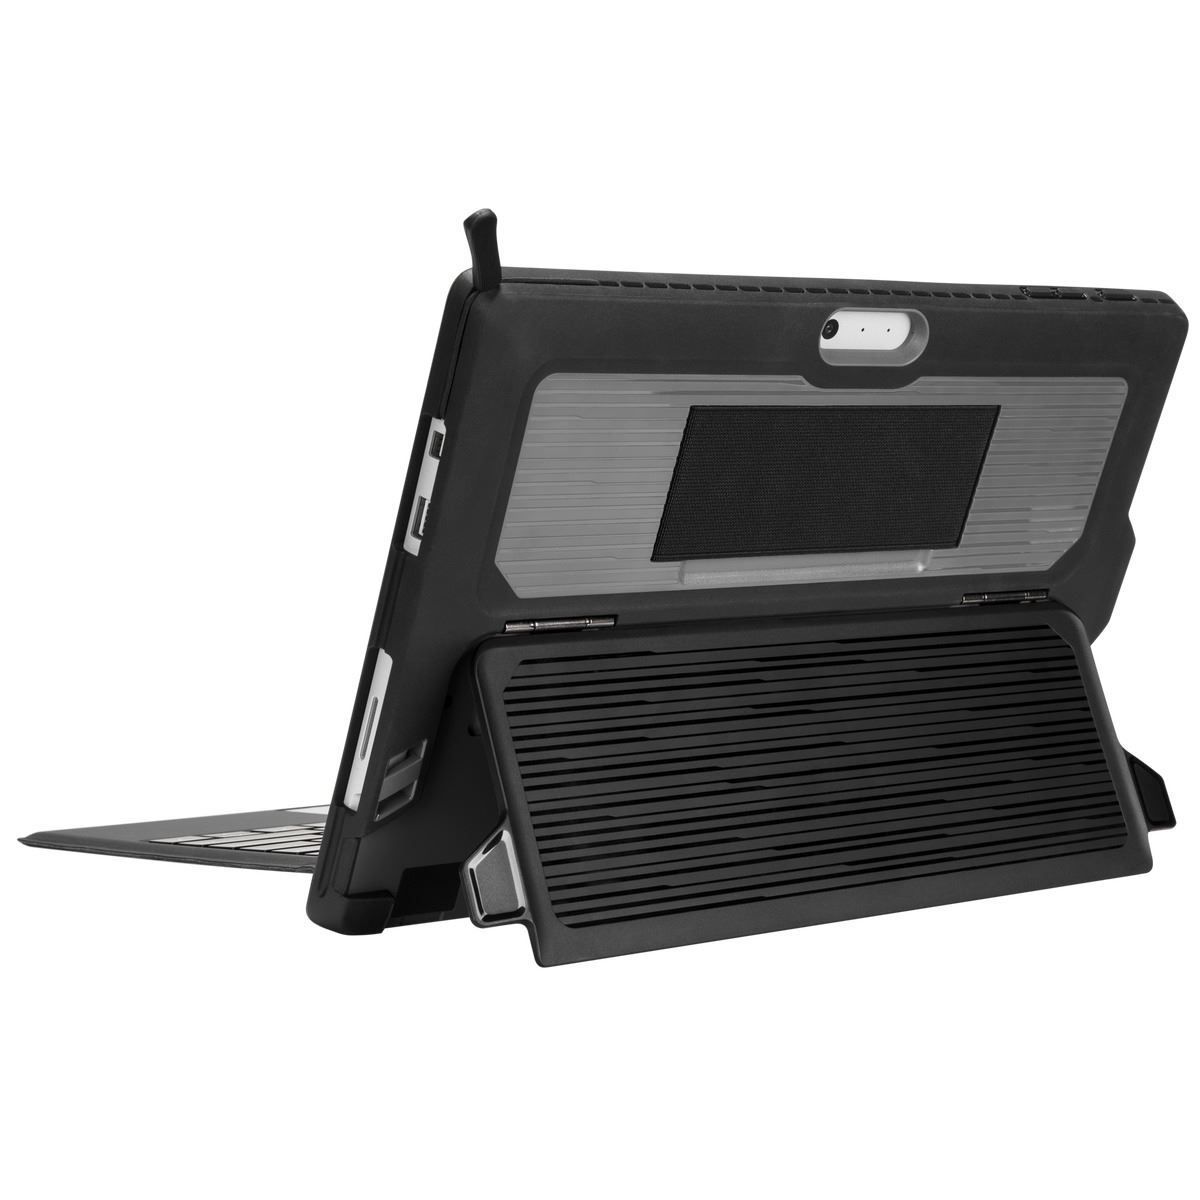 Protect Case for Microsoft Surface™ Pro 7, 6, 5, 5 LTE and 4